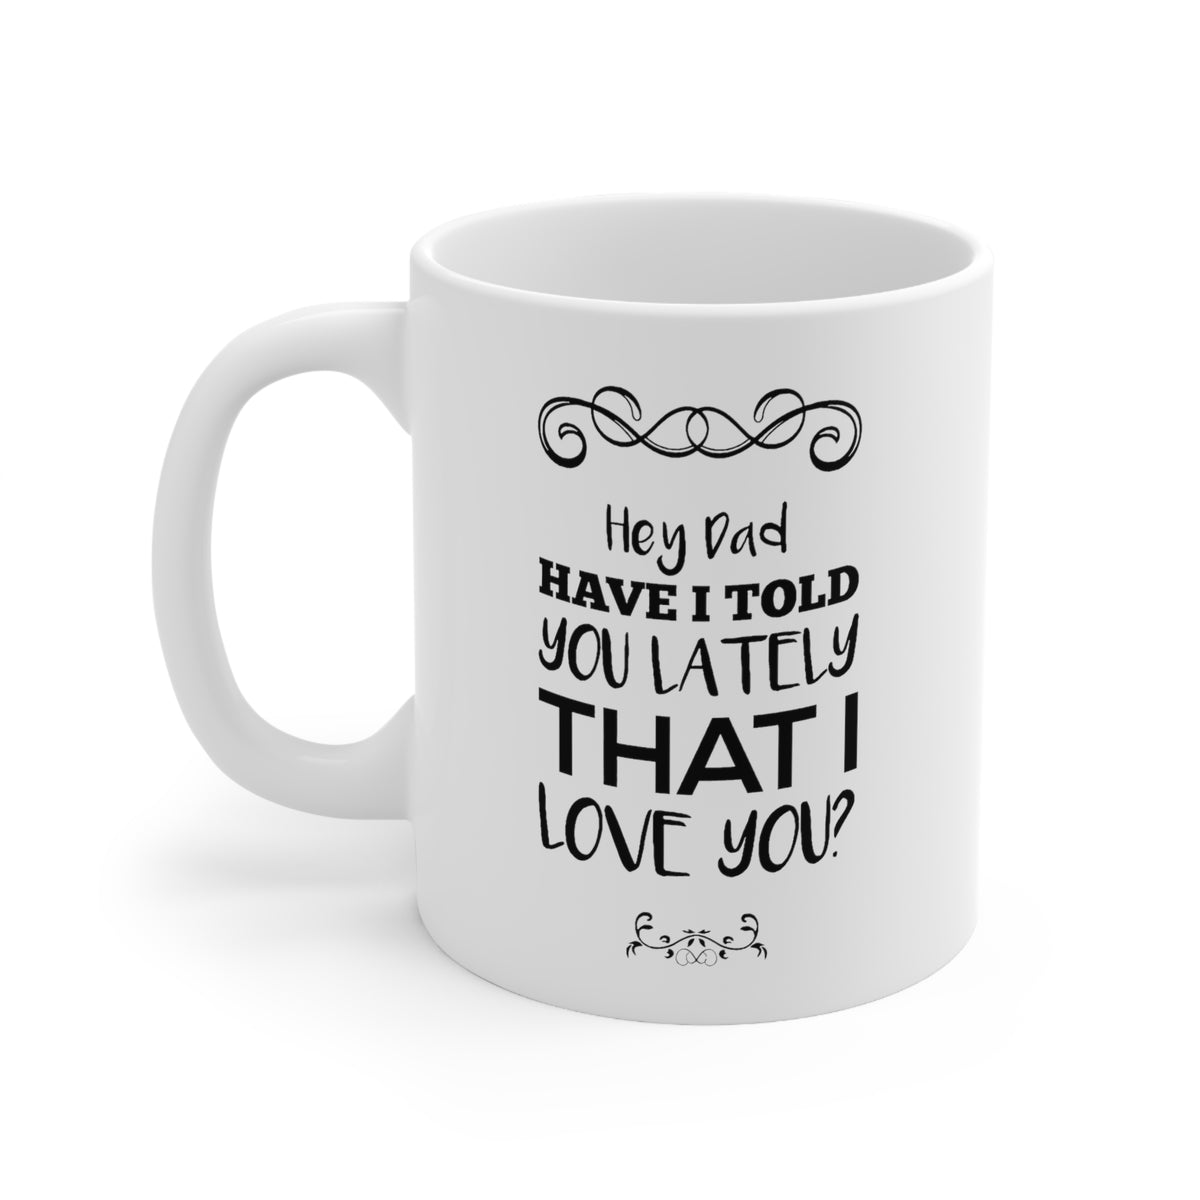 Hey Dad, Have I Told You Lately That I Love You Mug - Funny Father’s Day Gift From Daughter Ceramic Coffee Cup